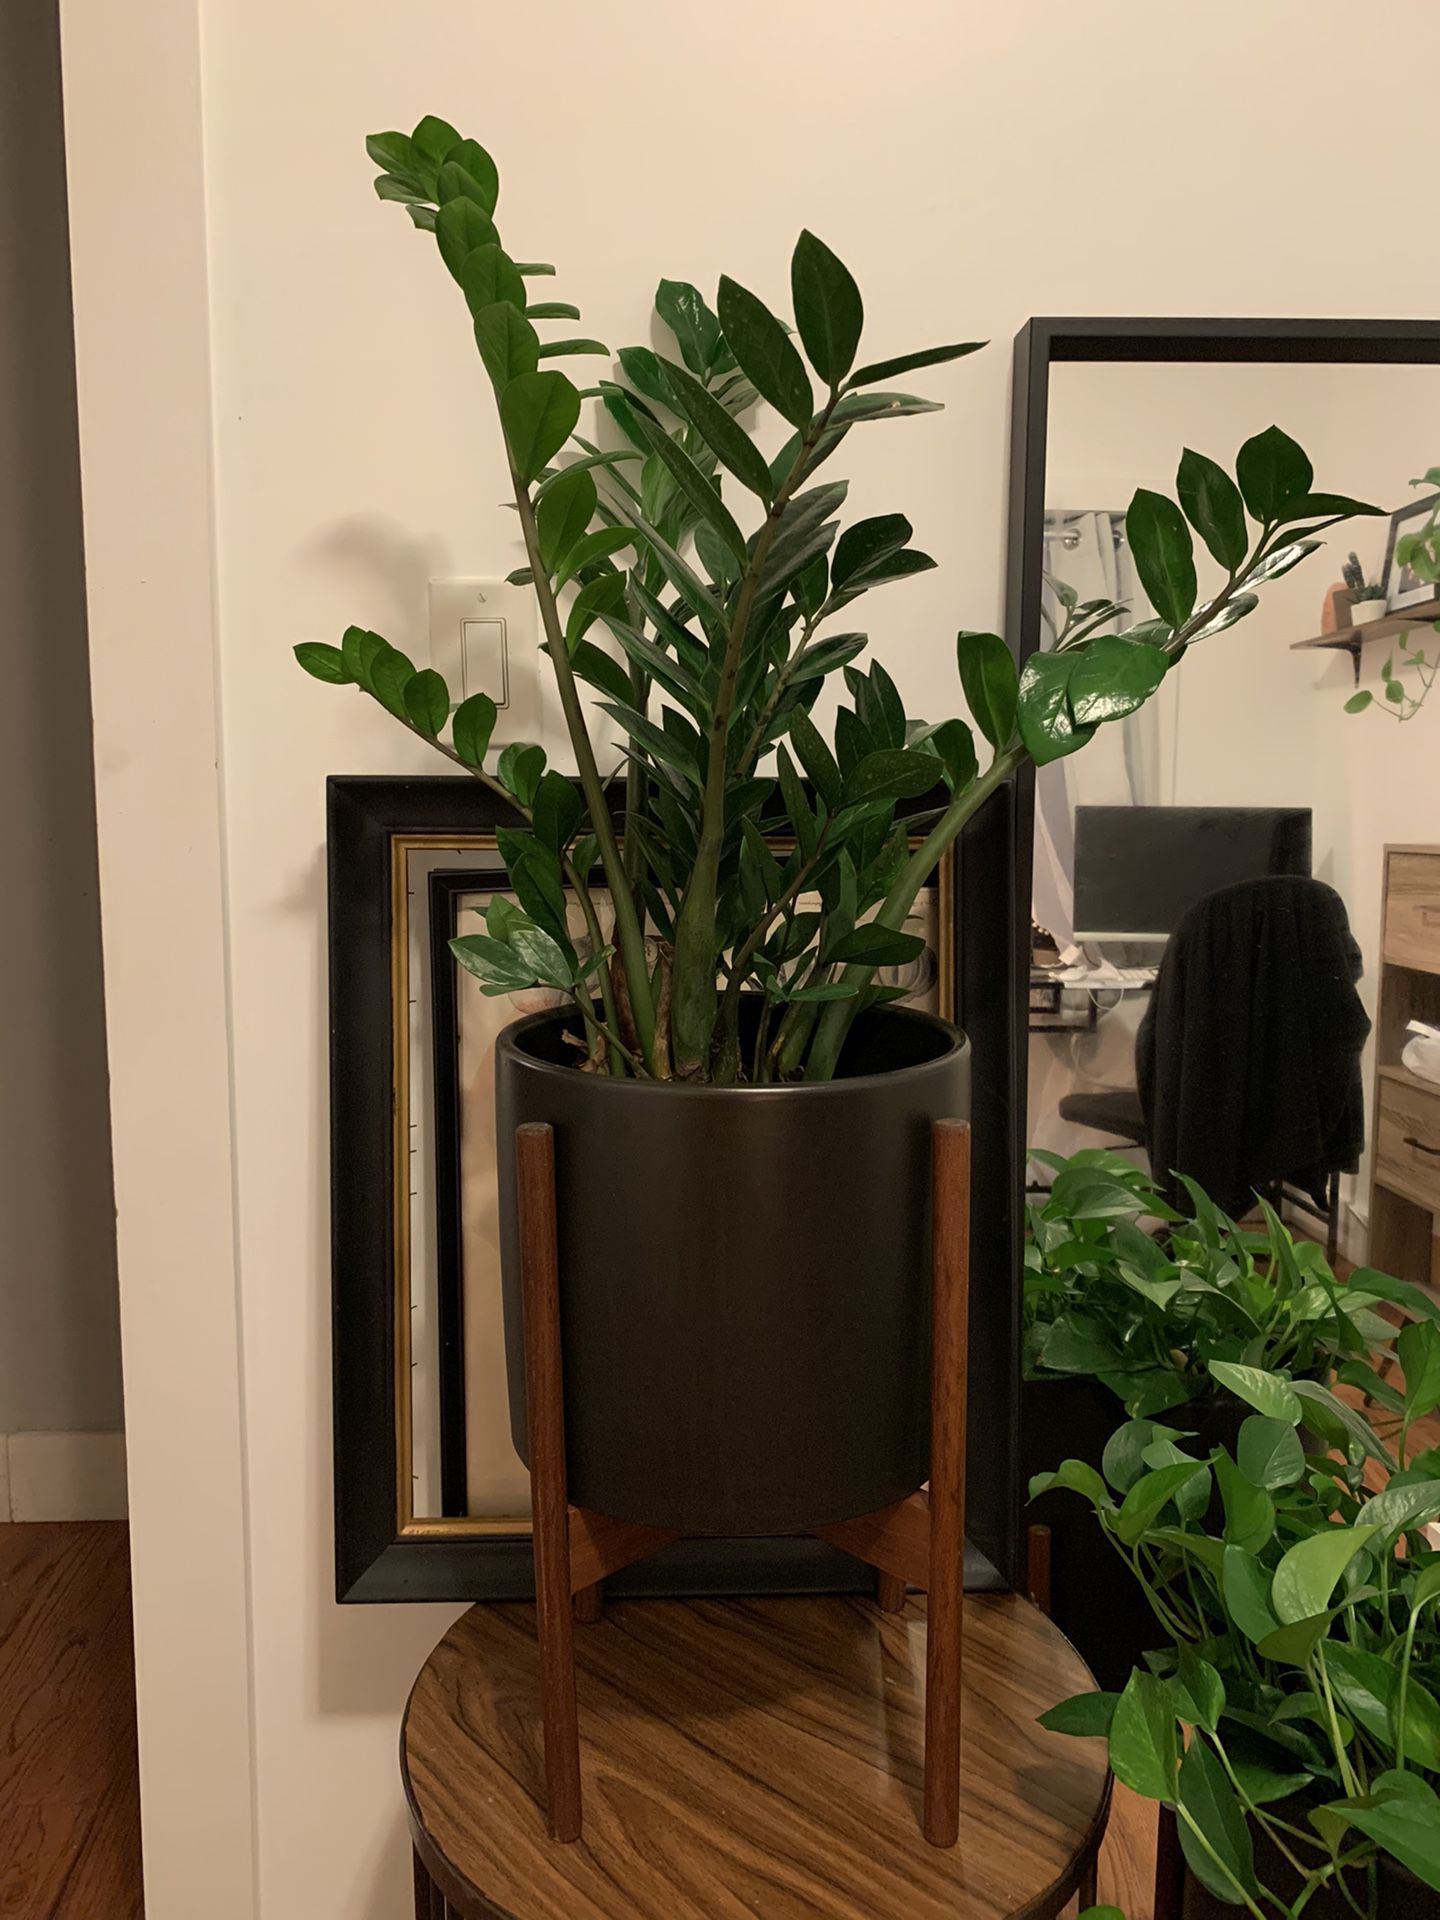 Healthy zz plant in West Elm pot and stand